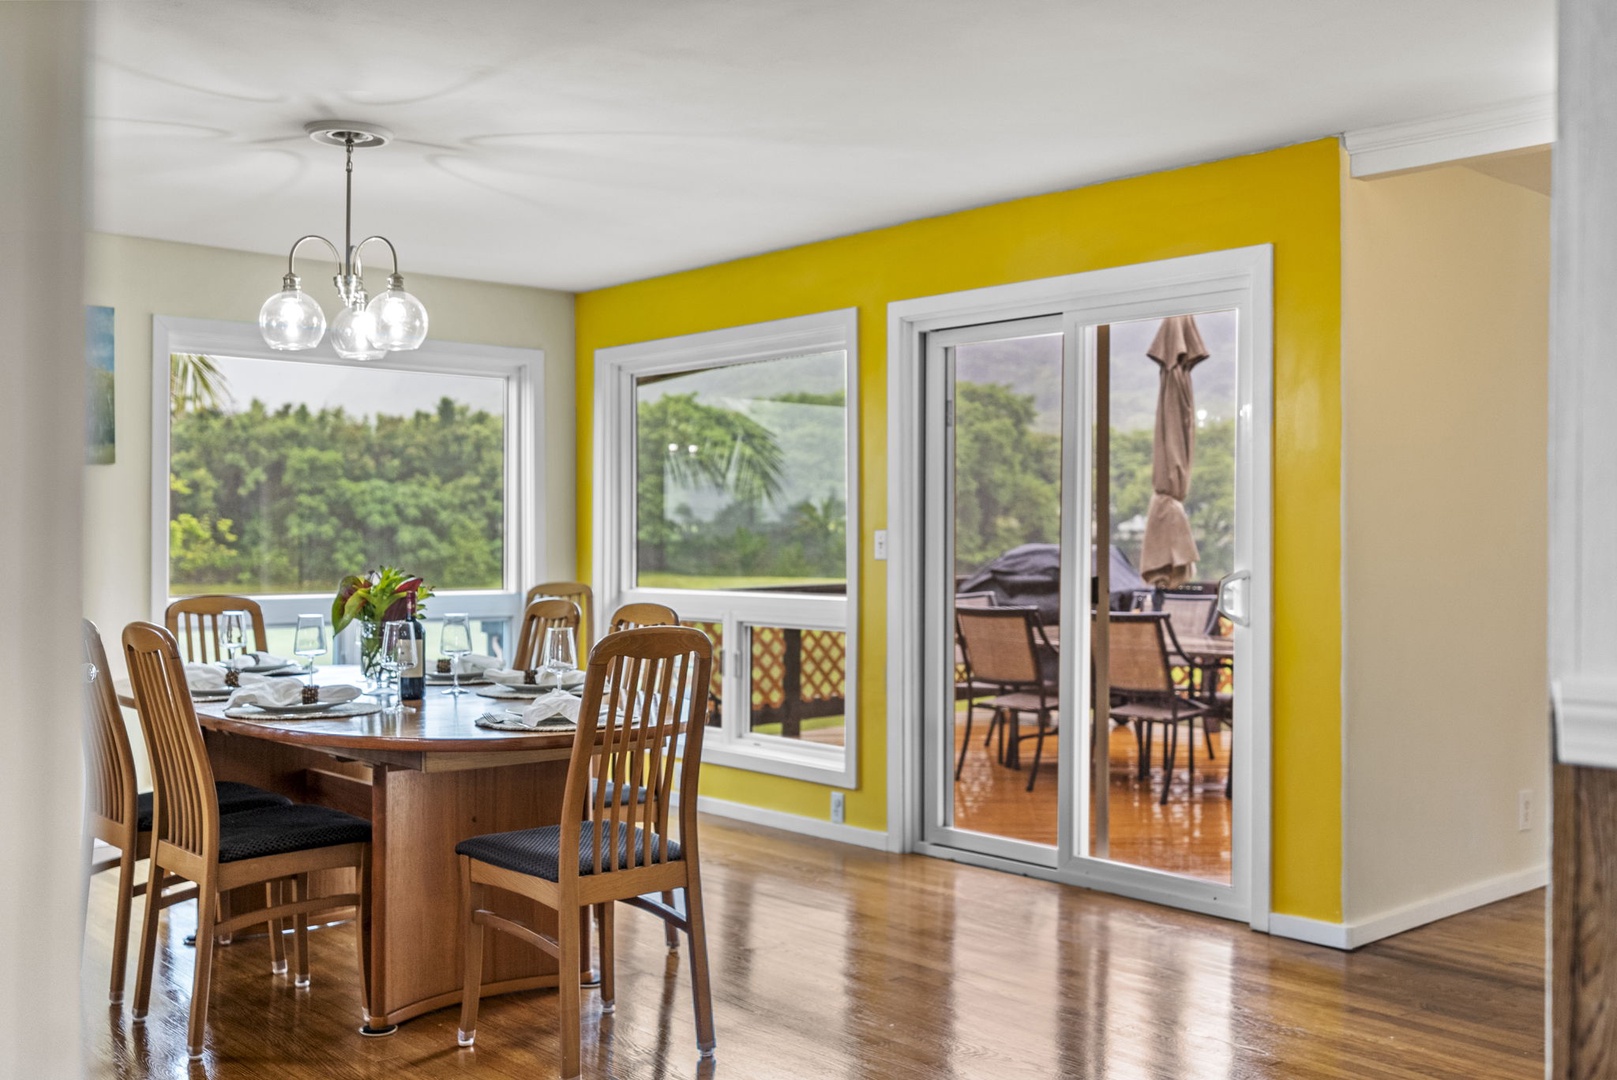 Hauula Vacation Rentals, Mau Loa Hale - Dining area surrounded by window to showcase the landscape